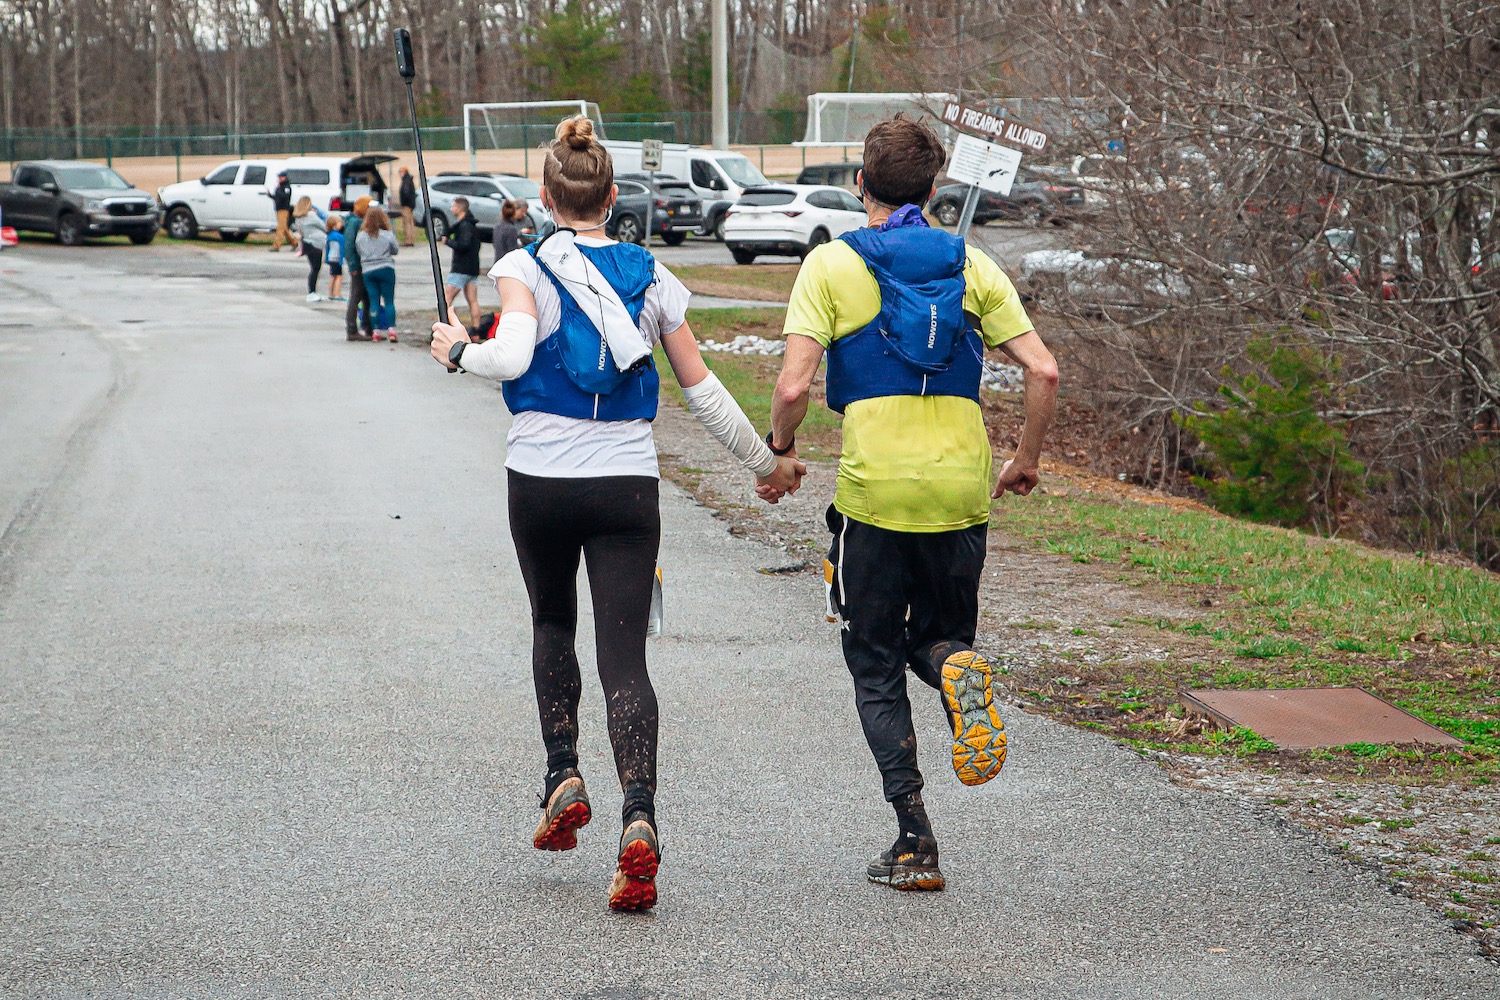 Running to the finish line of the Stump Jump 50k, hand in hand.